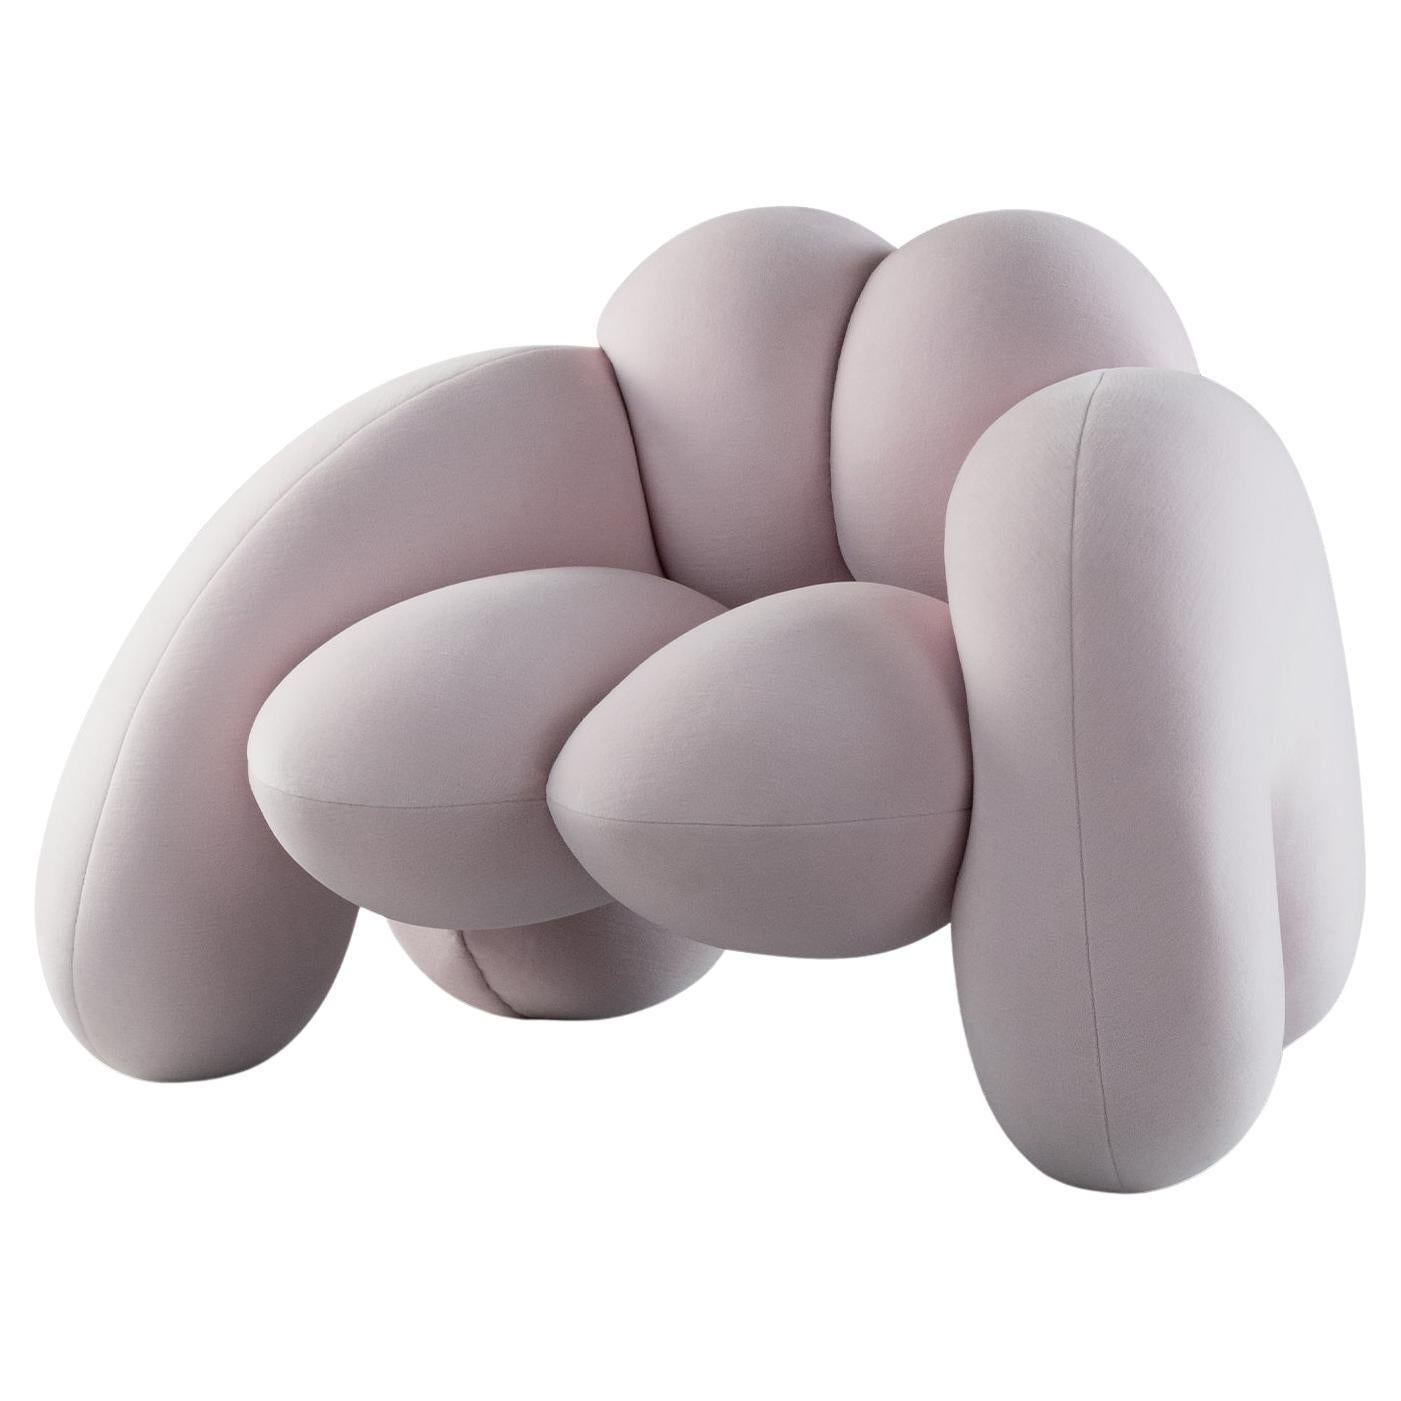 Part of the Peaches collection, the Derriere armchair conveys aspects of the female figure. The pieces are composed of a wood structure made up of 6 symmetrical pieces with the addition of a foam layer to create the large shapely surfaces. The